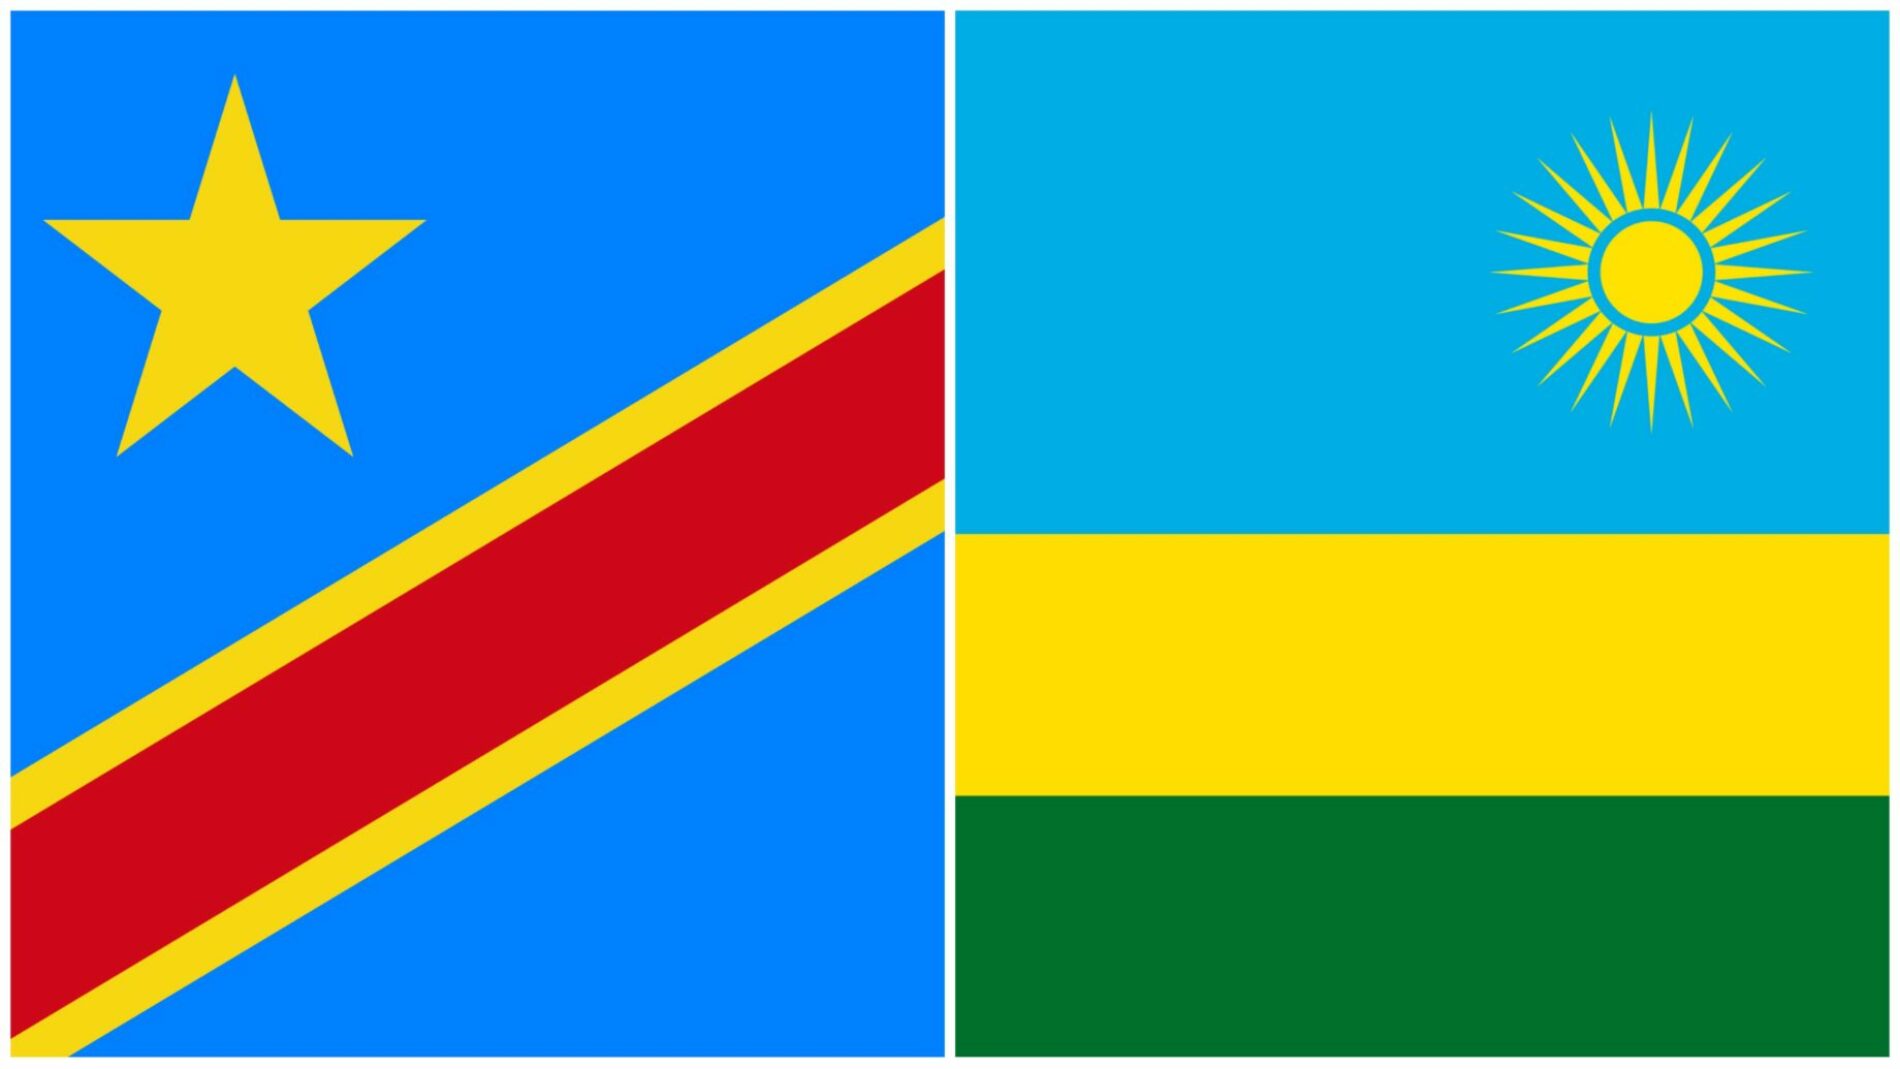 Rwanda-DRC: the Rwandan government criticizes Congolese authorities for multiplying unacceptable accusations